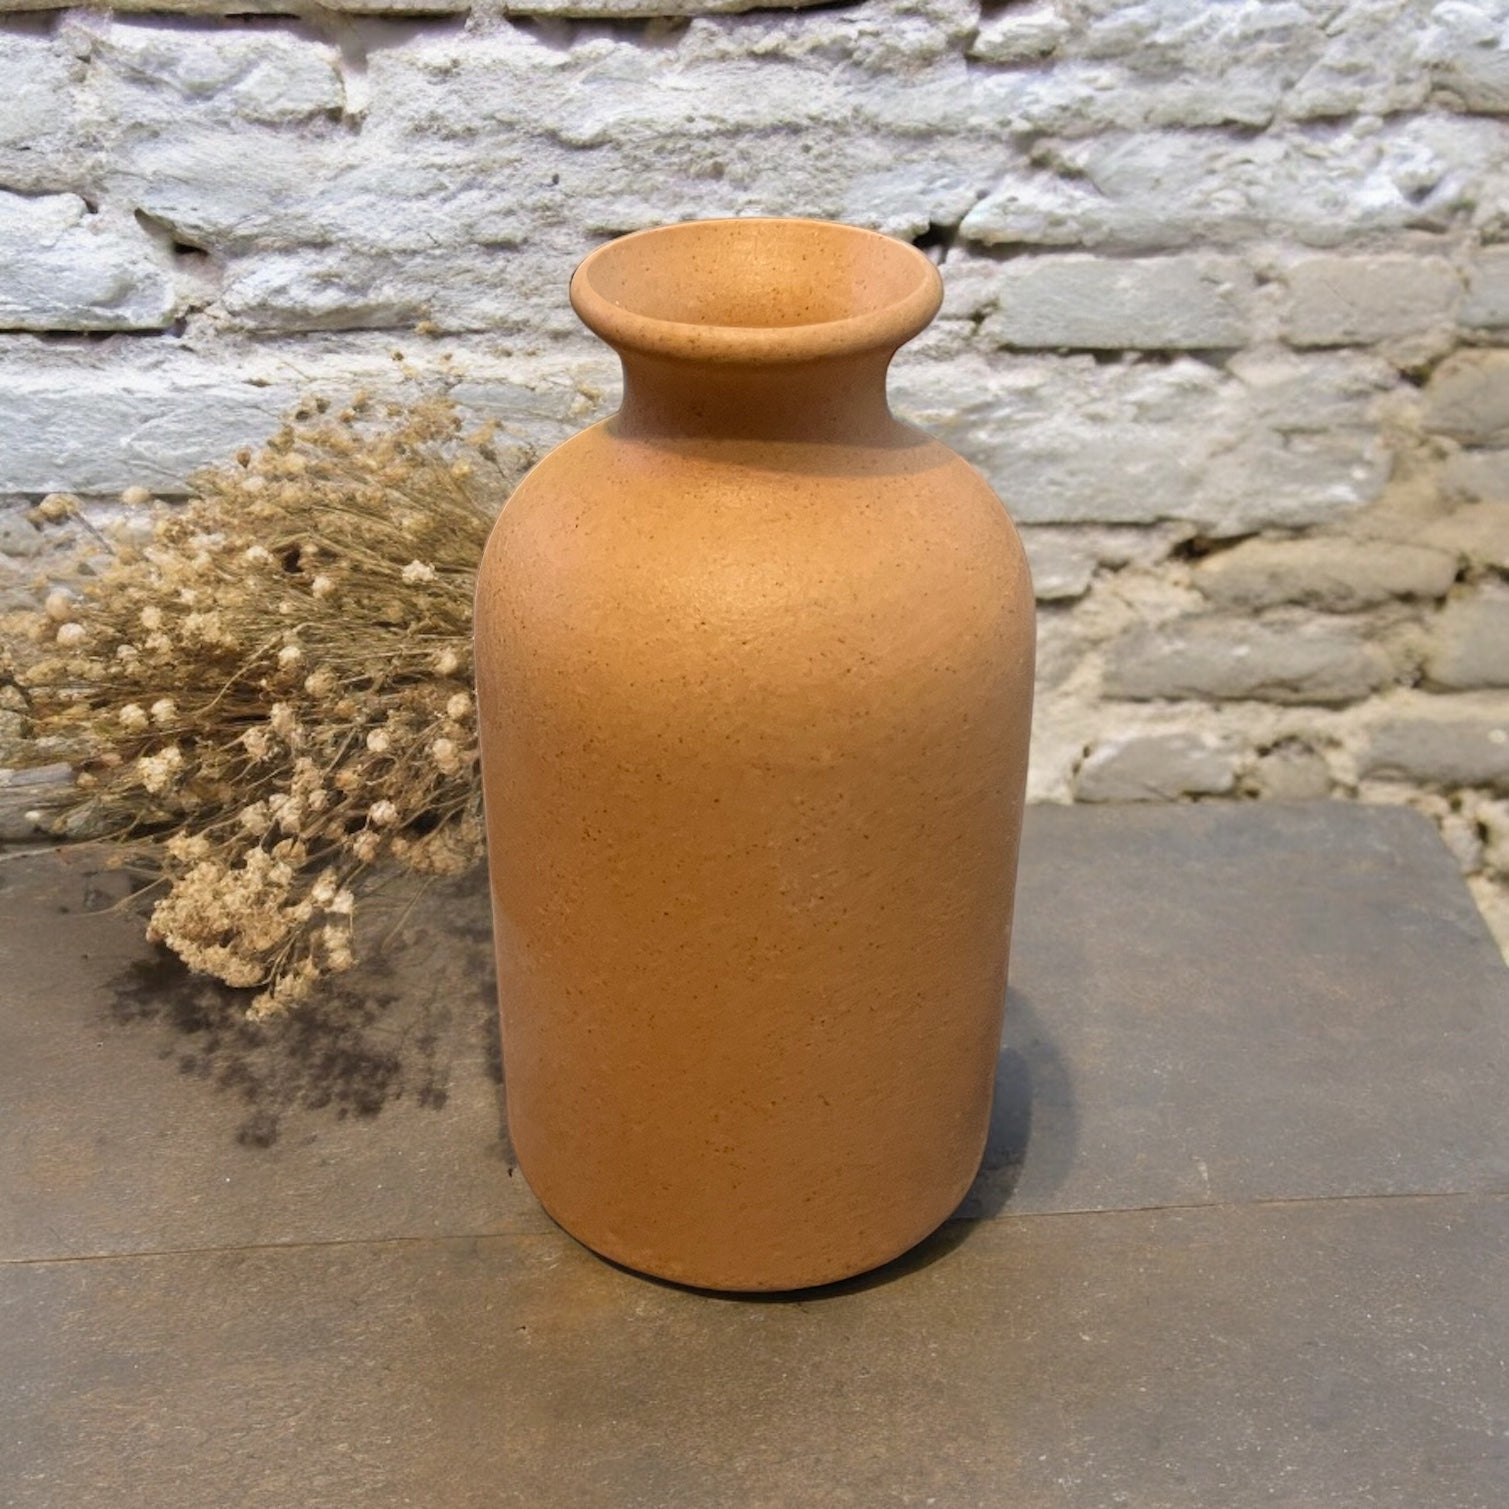 front view of the vase